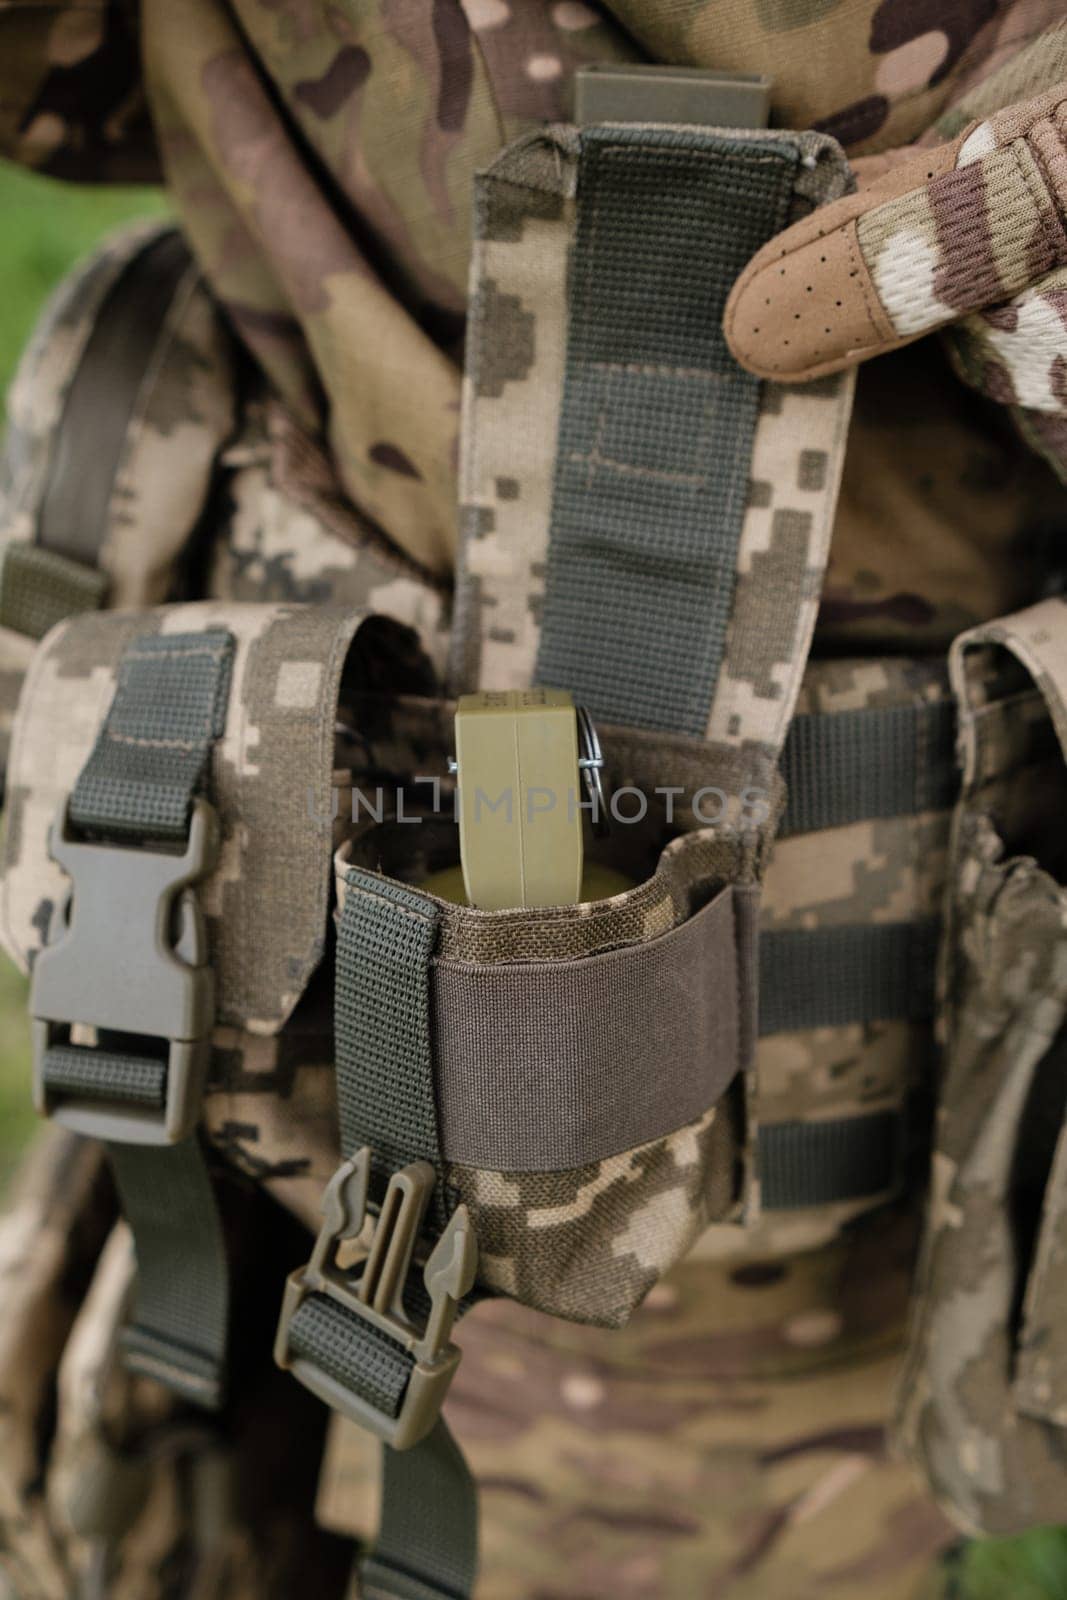 Preparing for Combat: Close-up of Soldier Putting on Gear in the Field before fight by Symonenko